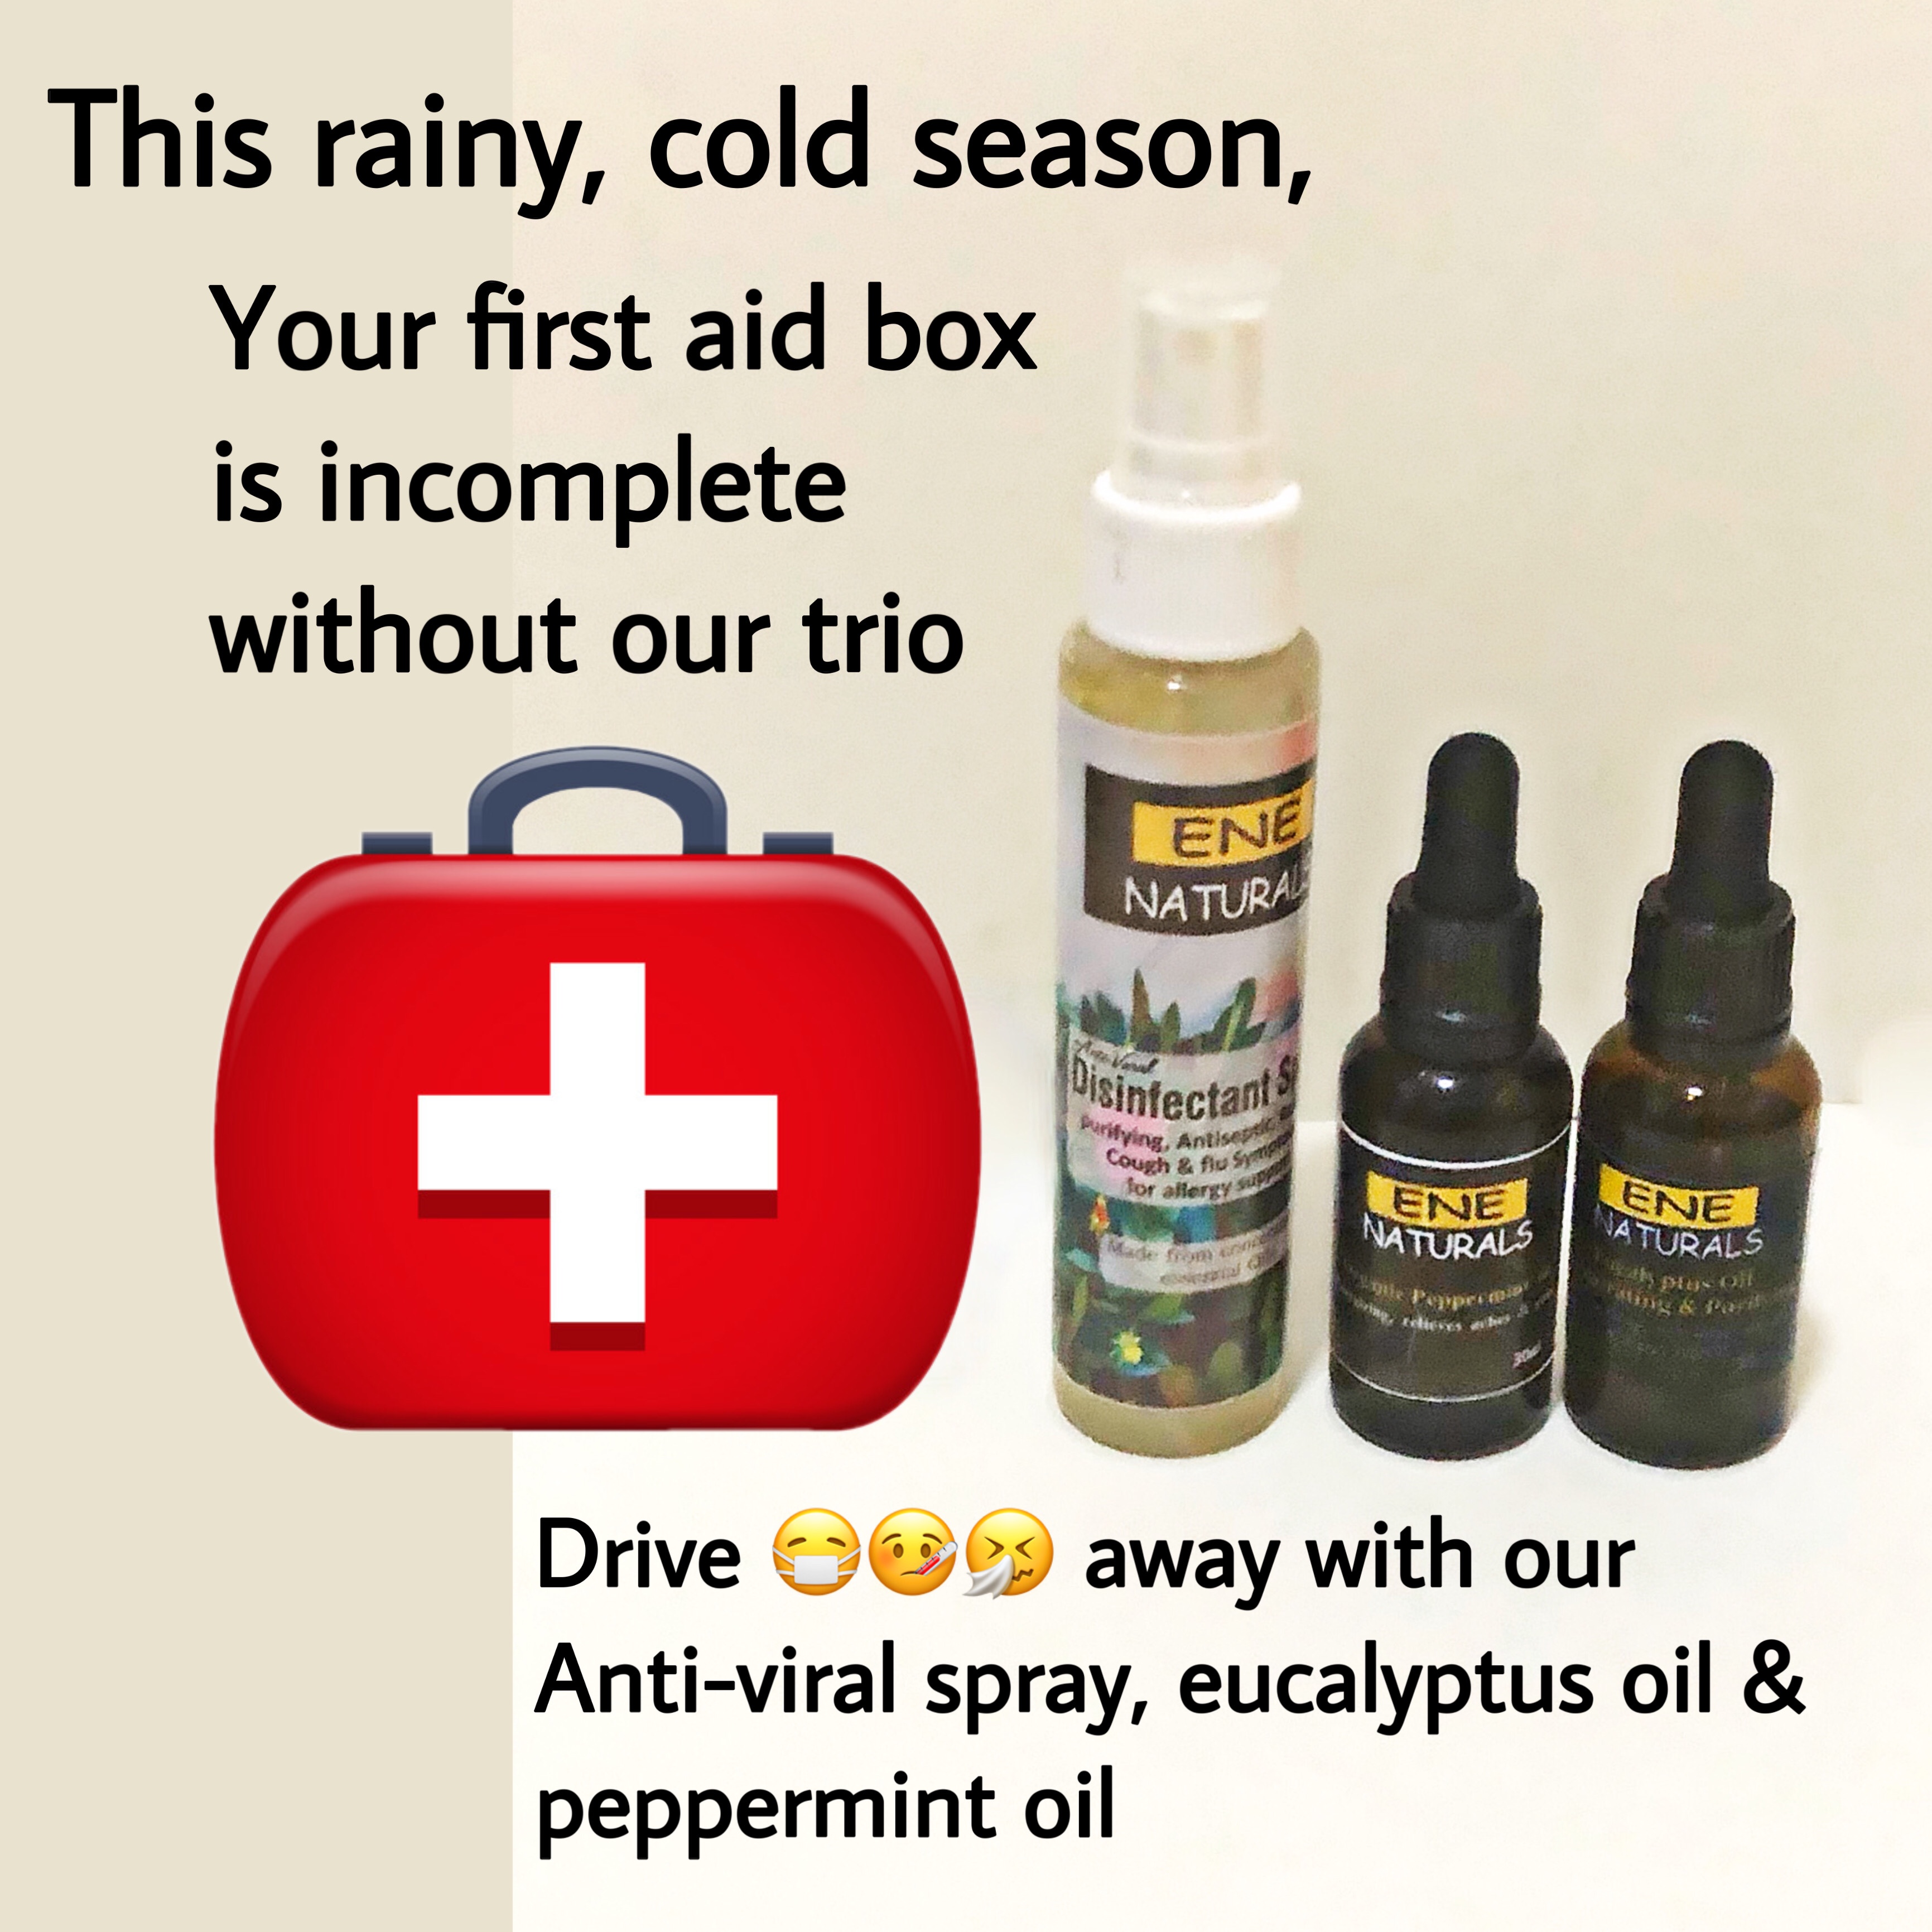 Allergy and cold relief the natural way